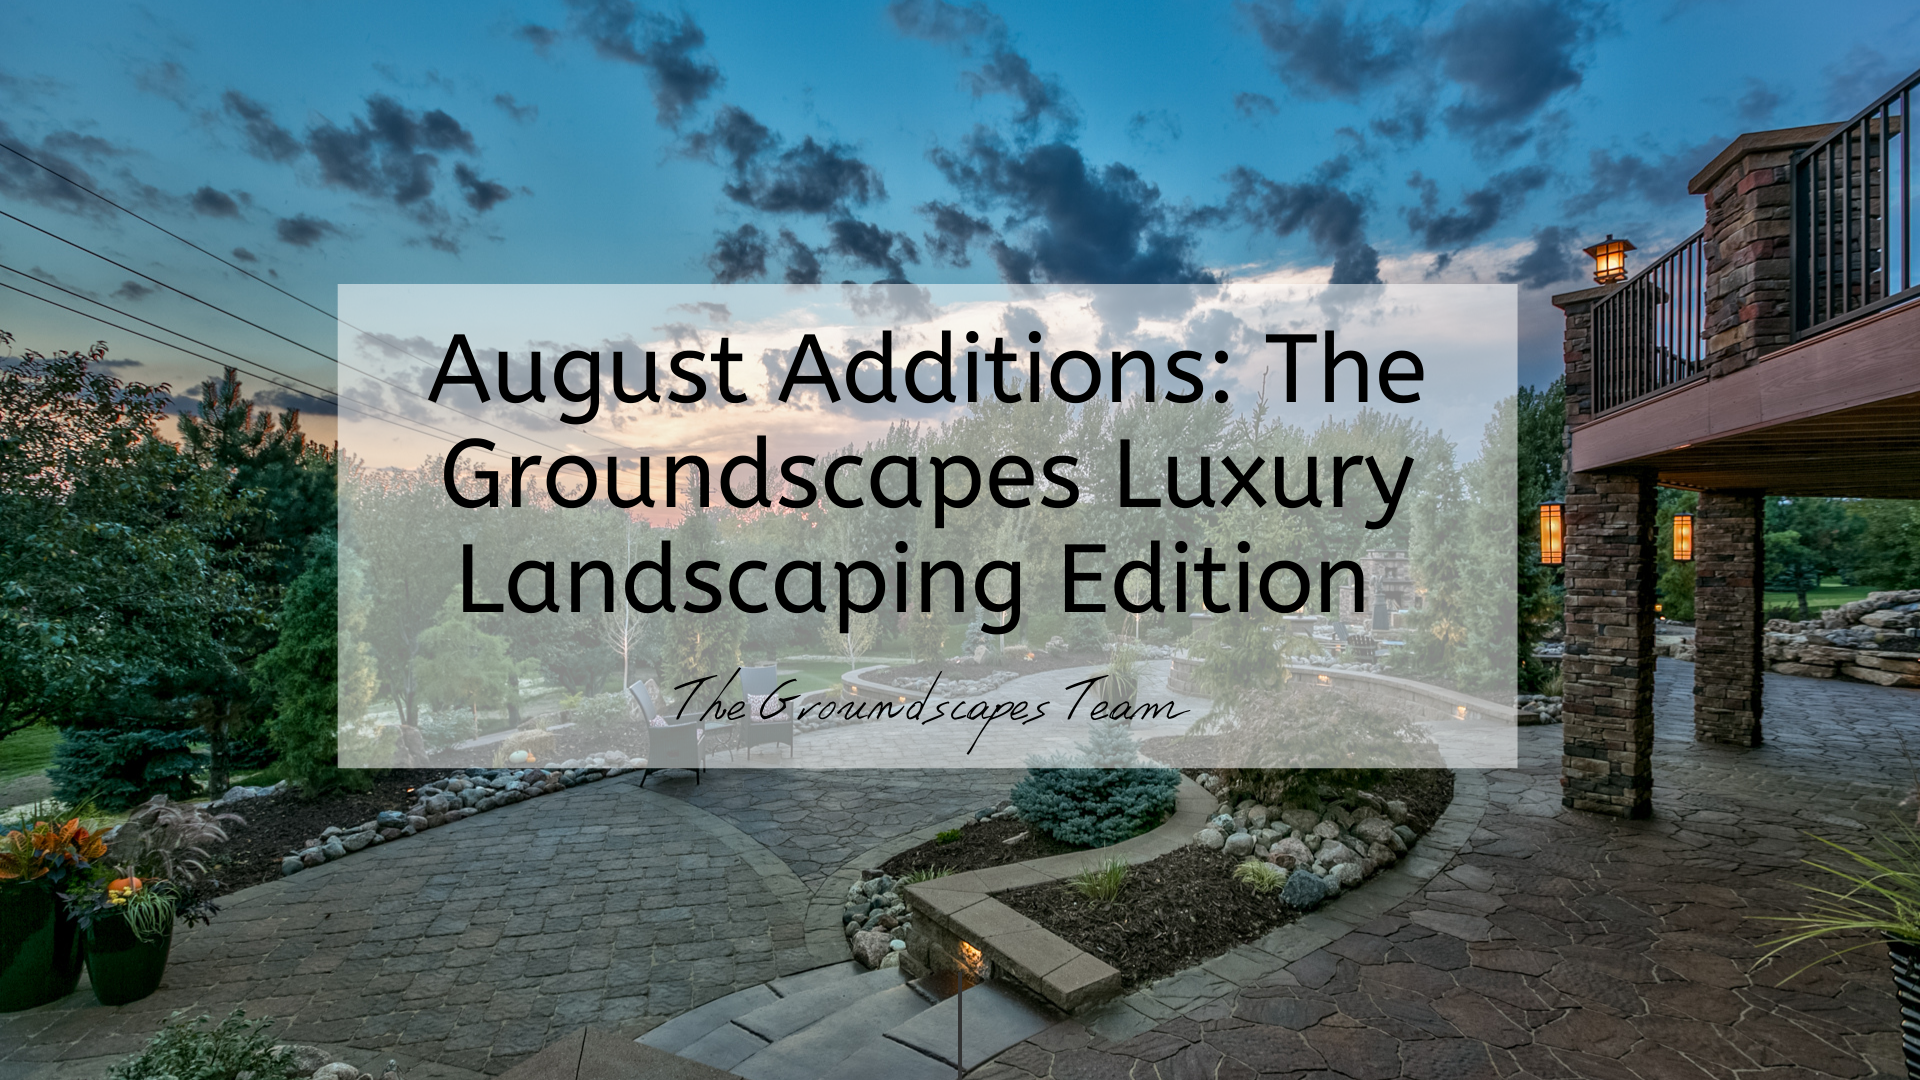 August Additions: The Groundscapes Luxury Landscaping Edition